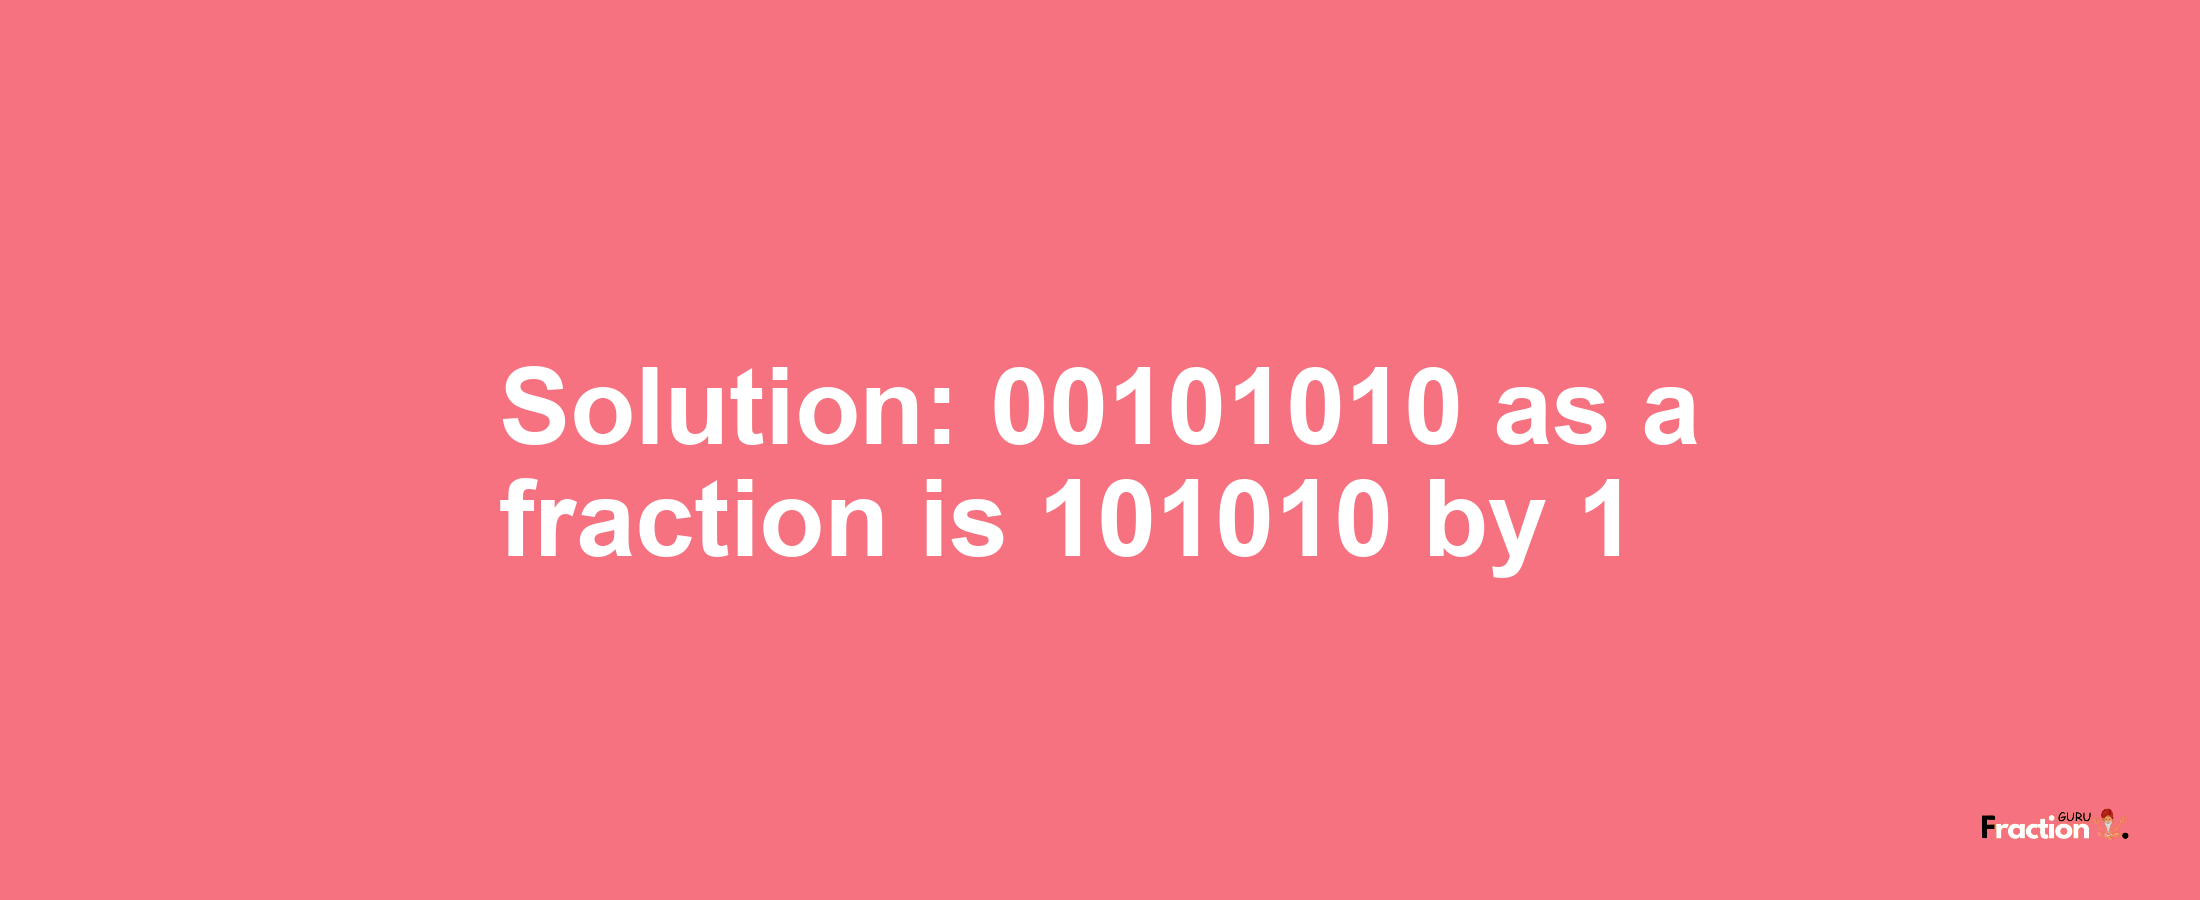 Solution:00101010 as a fraction is 101010/1